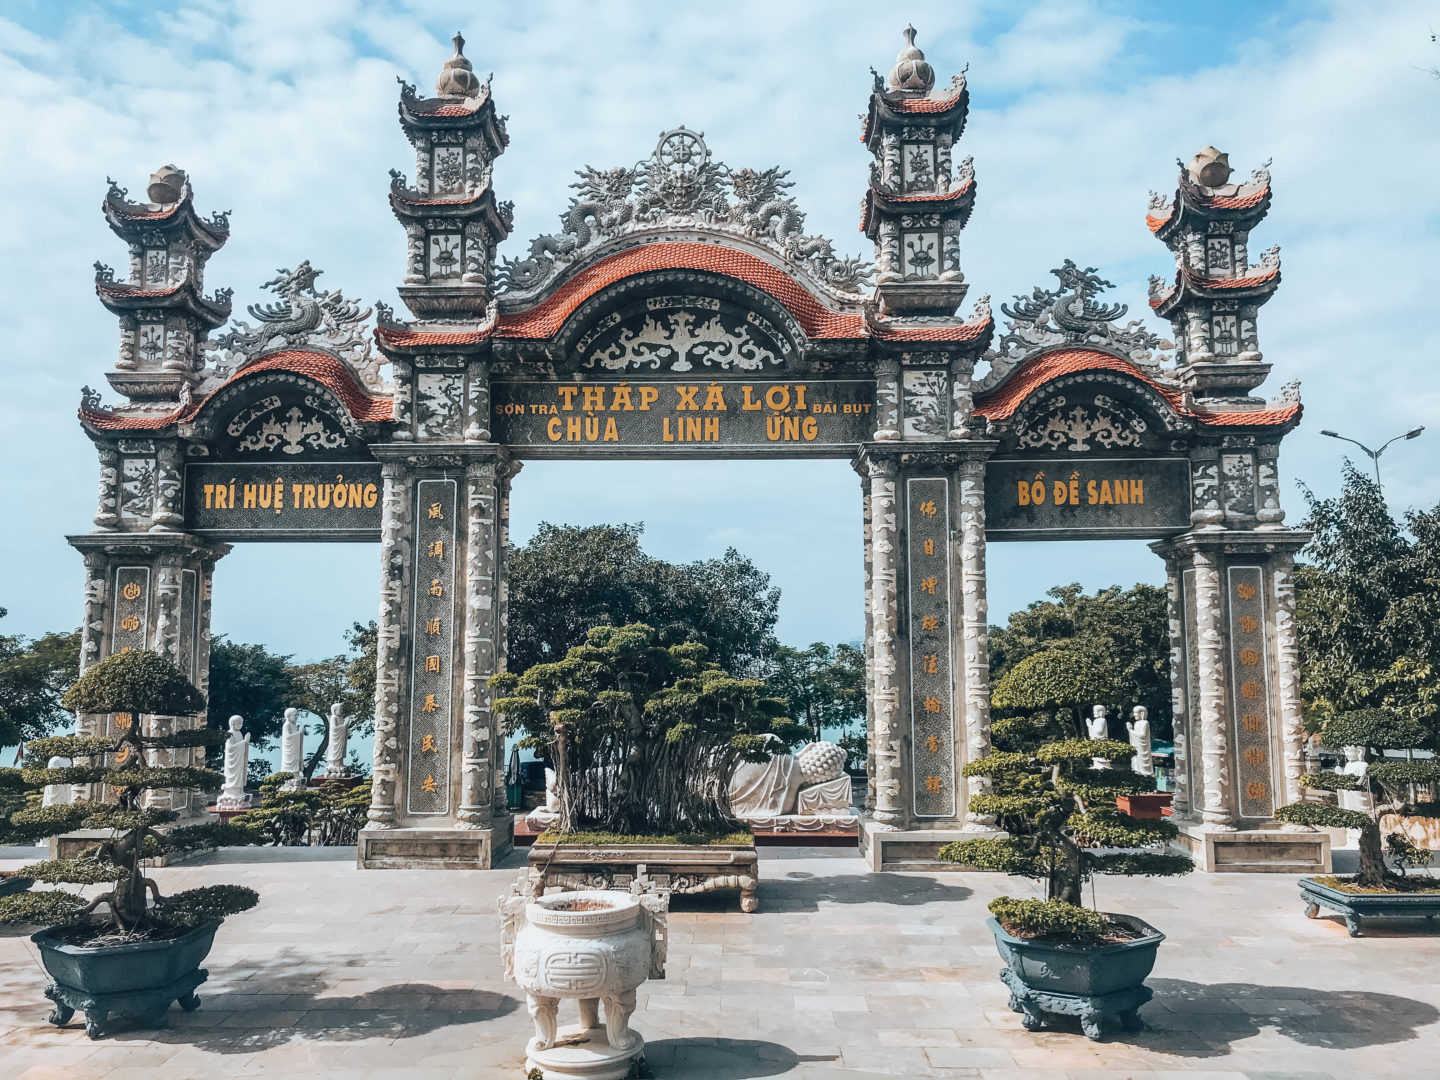 Chua Linh Ung pagoda architecture and main gate